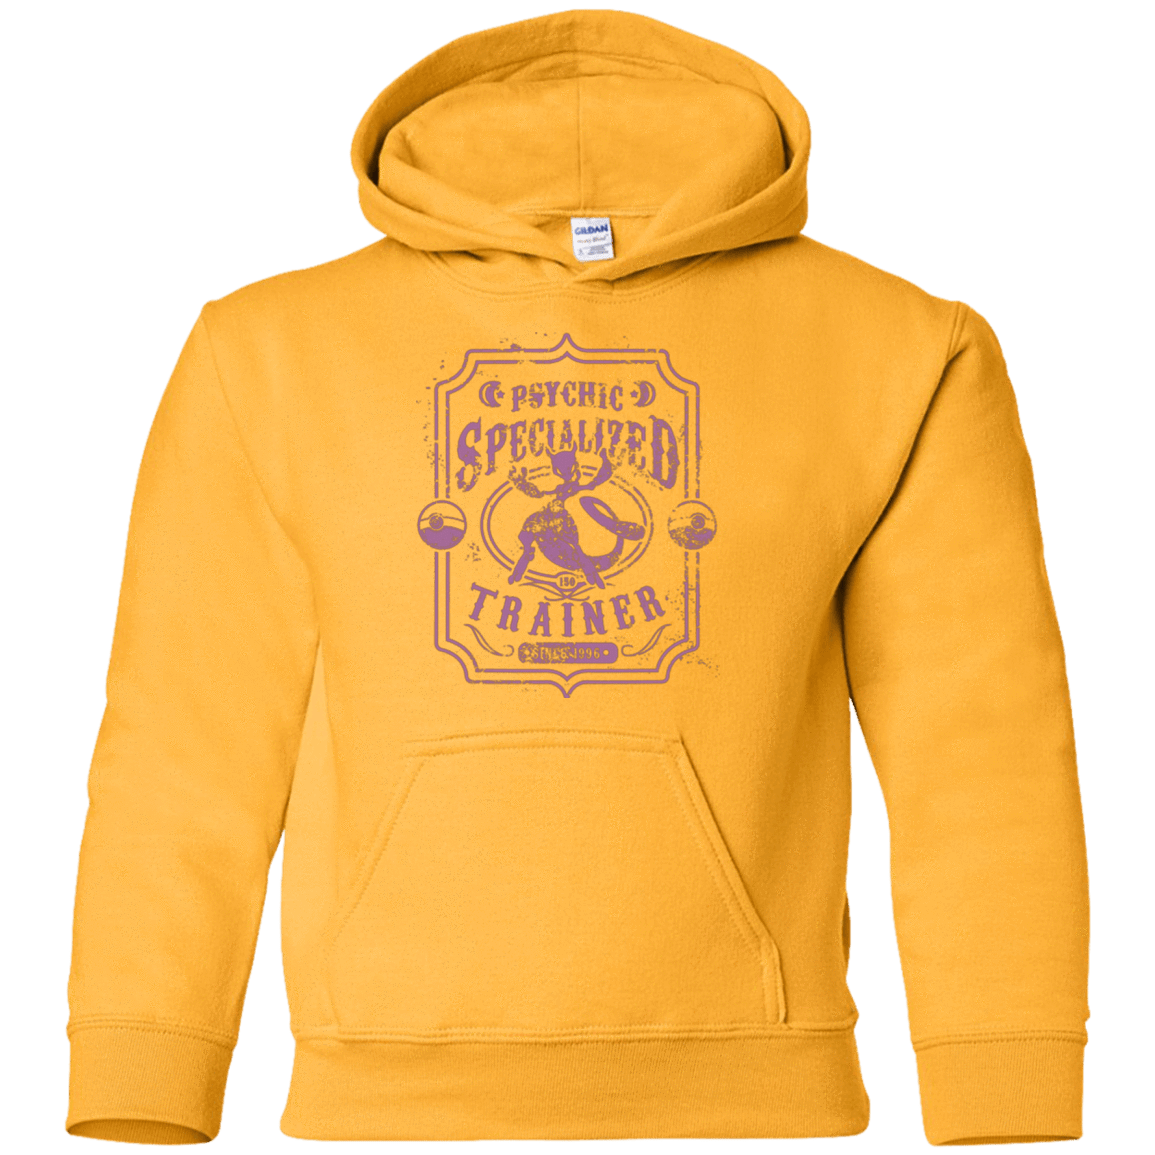 Sweatshirts Gold / YS Psychic Specialized Trainer 2 Youth Hoodie